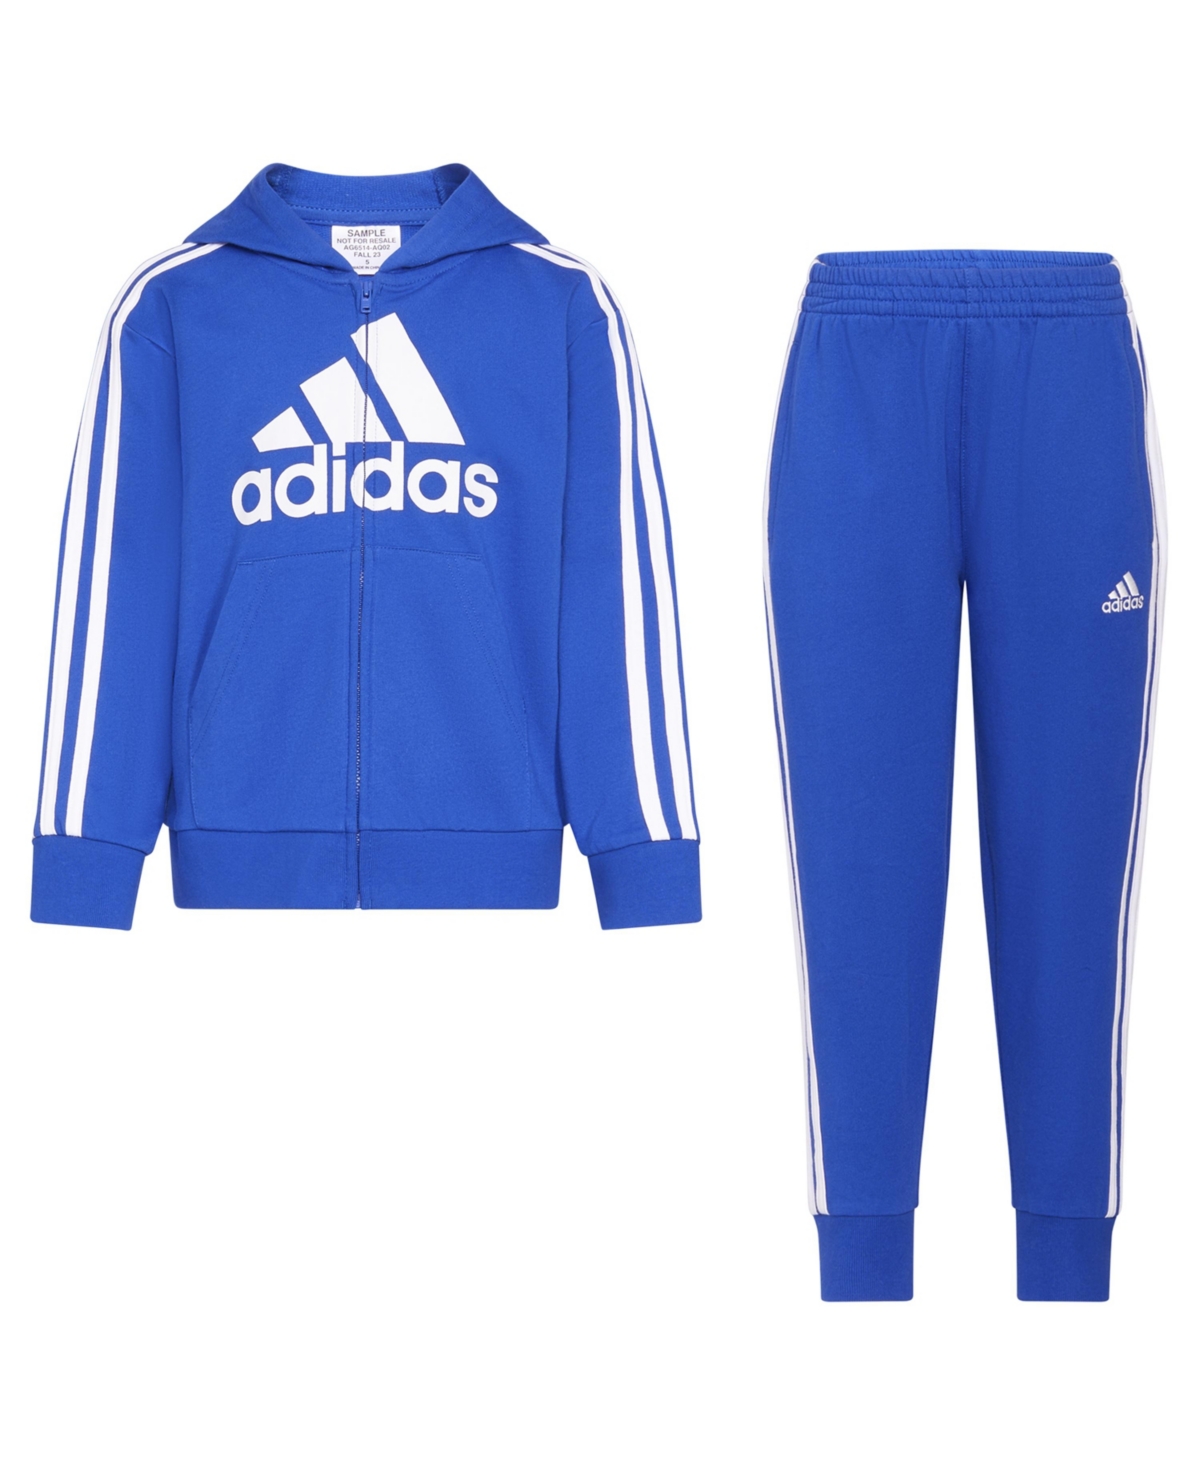 Adidas Originals Toddler Boys Hooded French Terry Jacket And Jogger Pants, 2-piece Set In Team Royal Blue